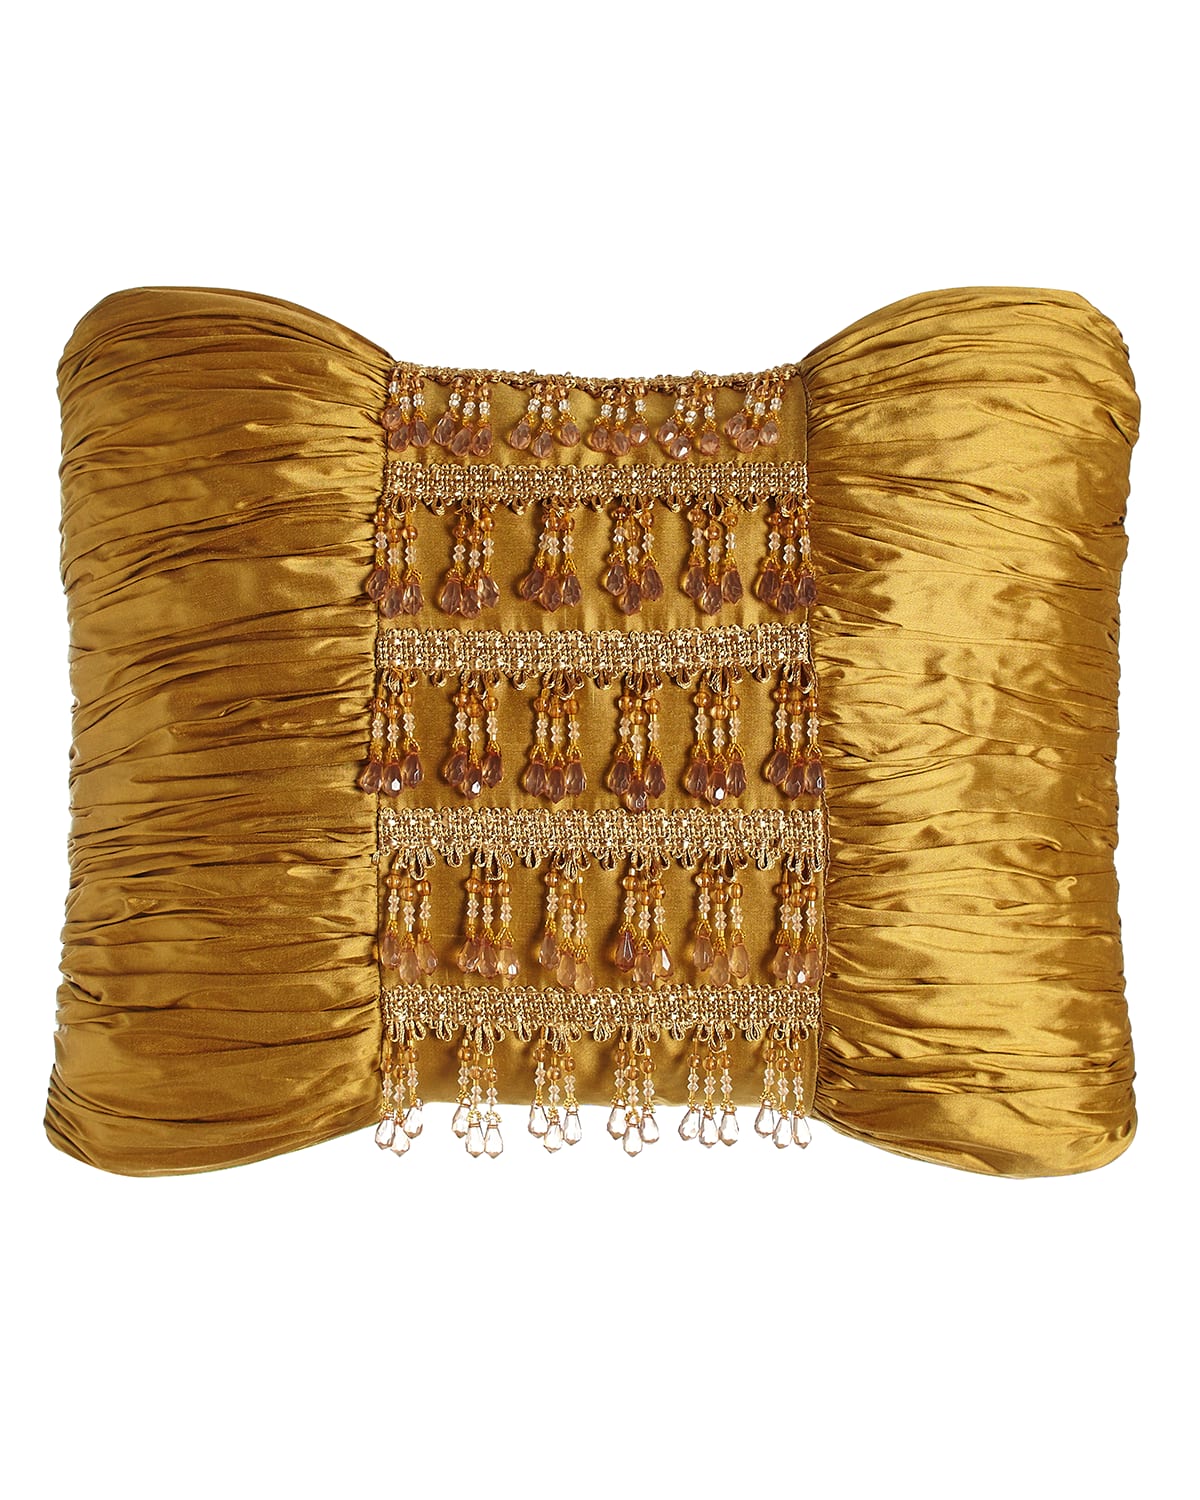 Image Austin Horn Collection Royale Gold Silk Pillow with Beads, 13" x 18"